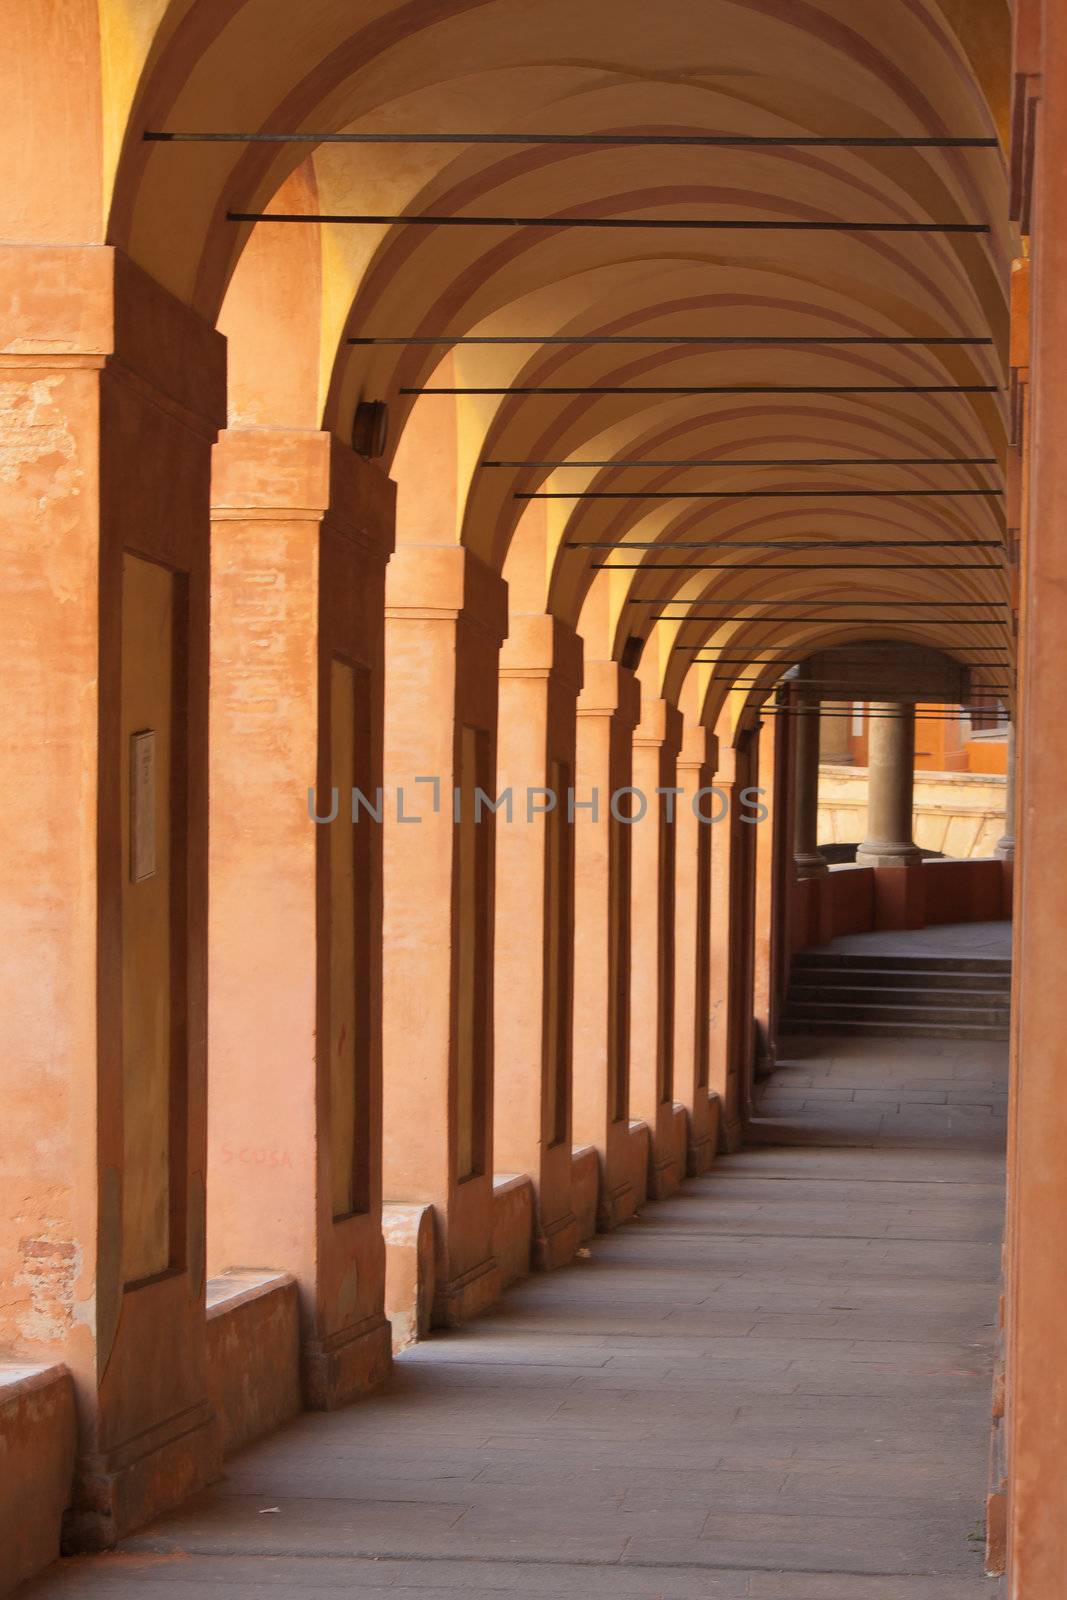 San Luca arcade is the longest porch in the world. Bologna, Italy